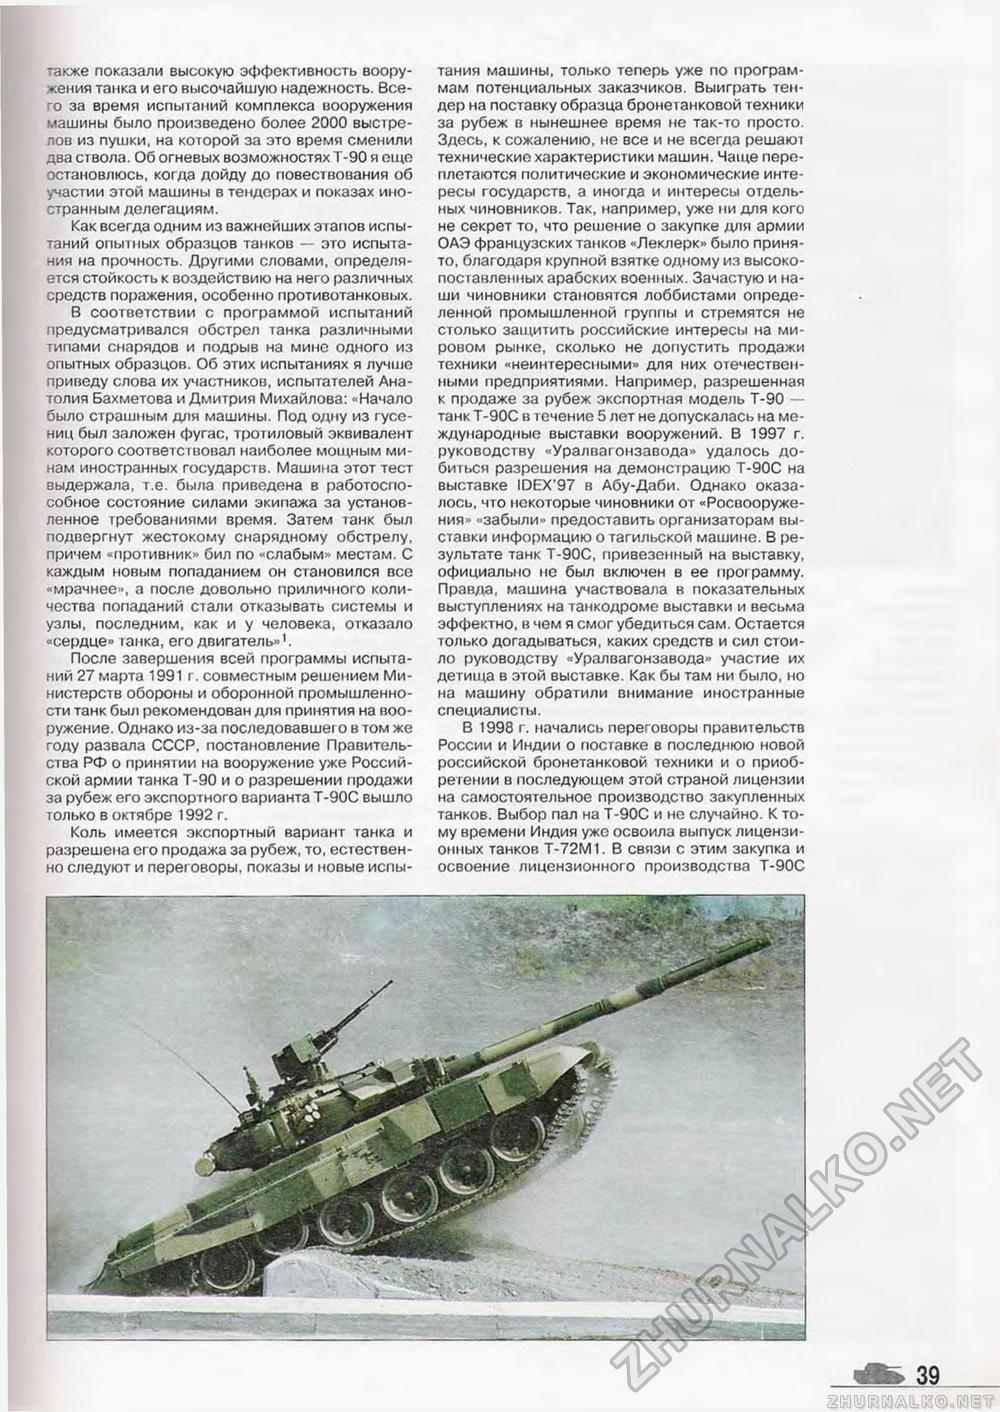  Special - T-90,  41